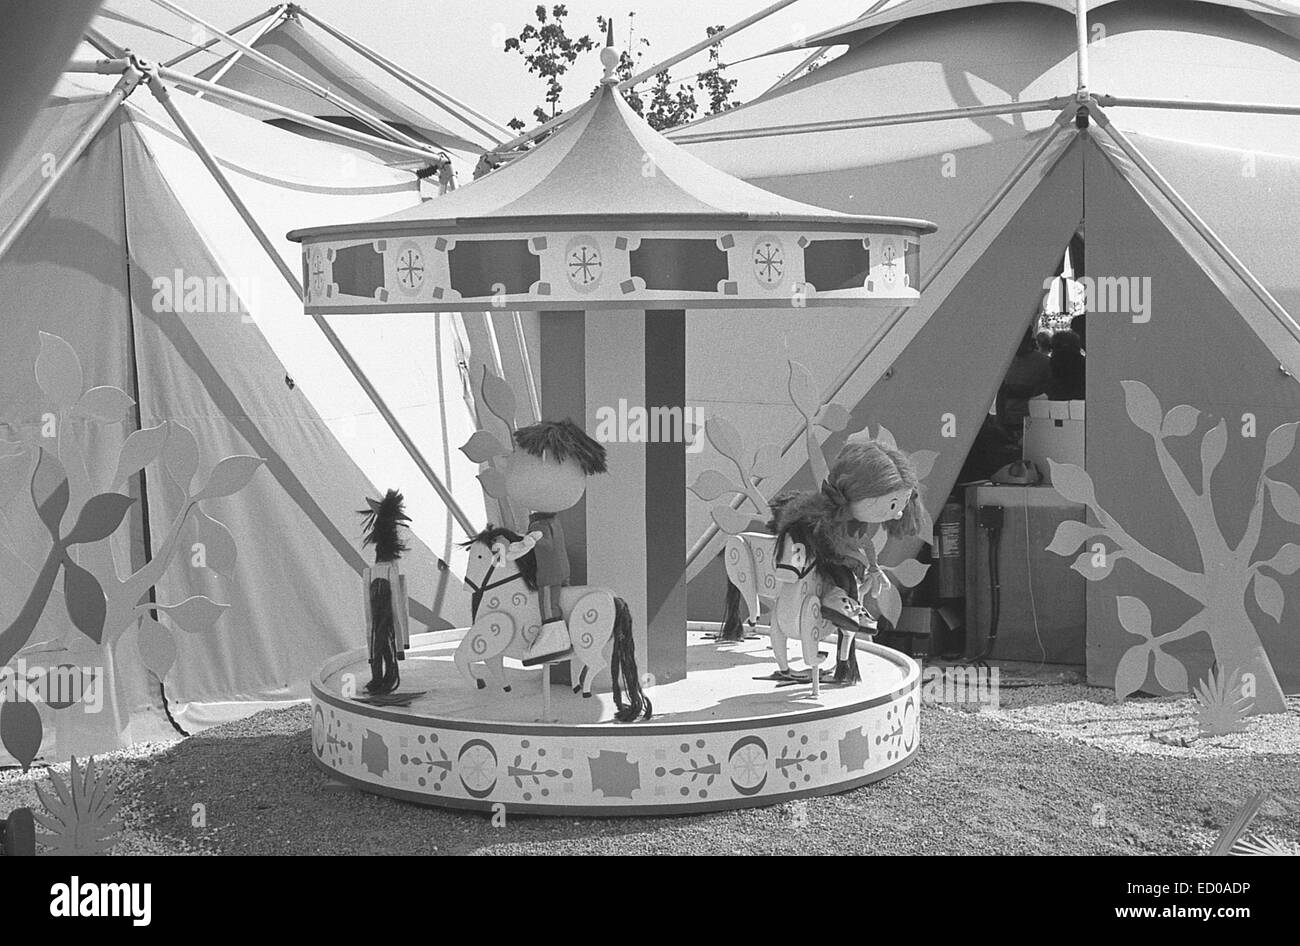 bw image from the Liverpool Garden Festival in 1984 Stock Photo